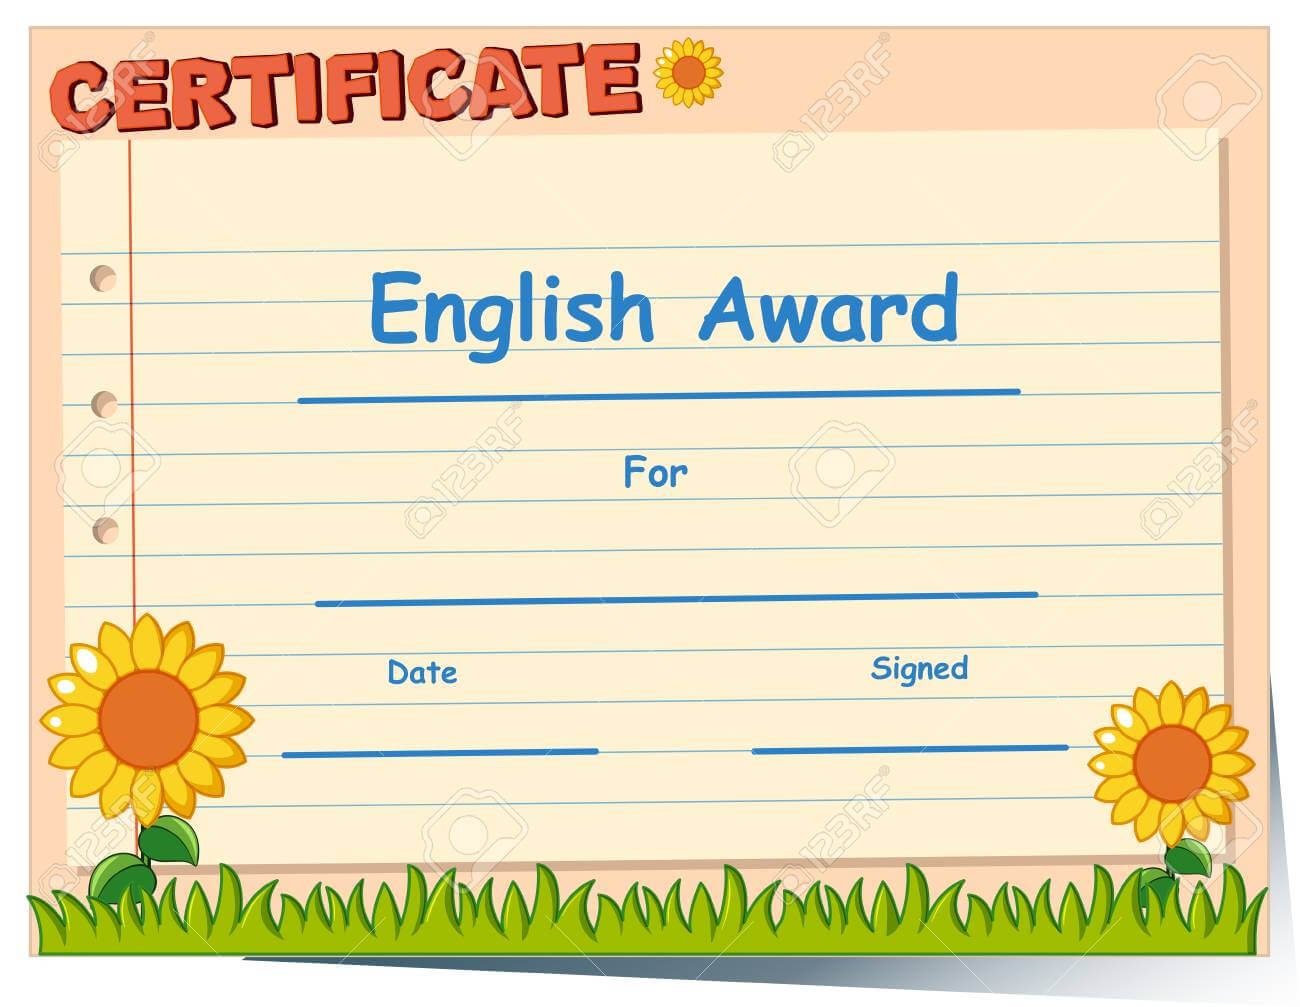 Certificate Template For English Award Illustration With Regard To Free Printable Blank Award Certificate Templates